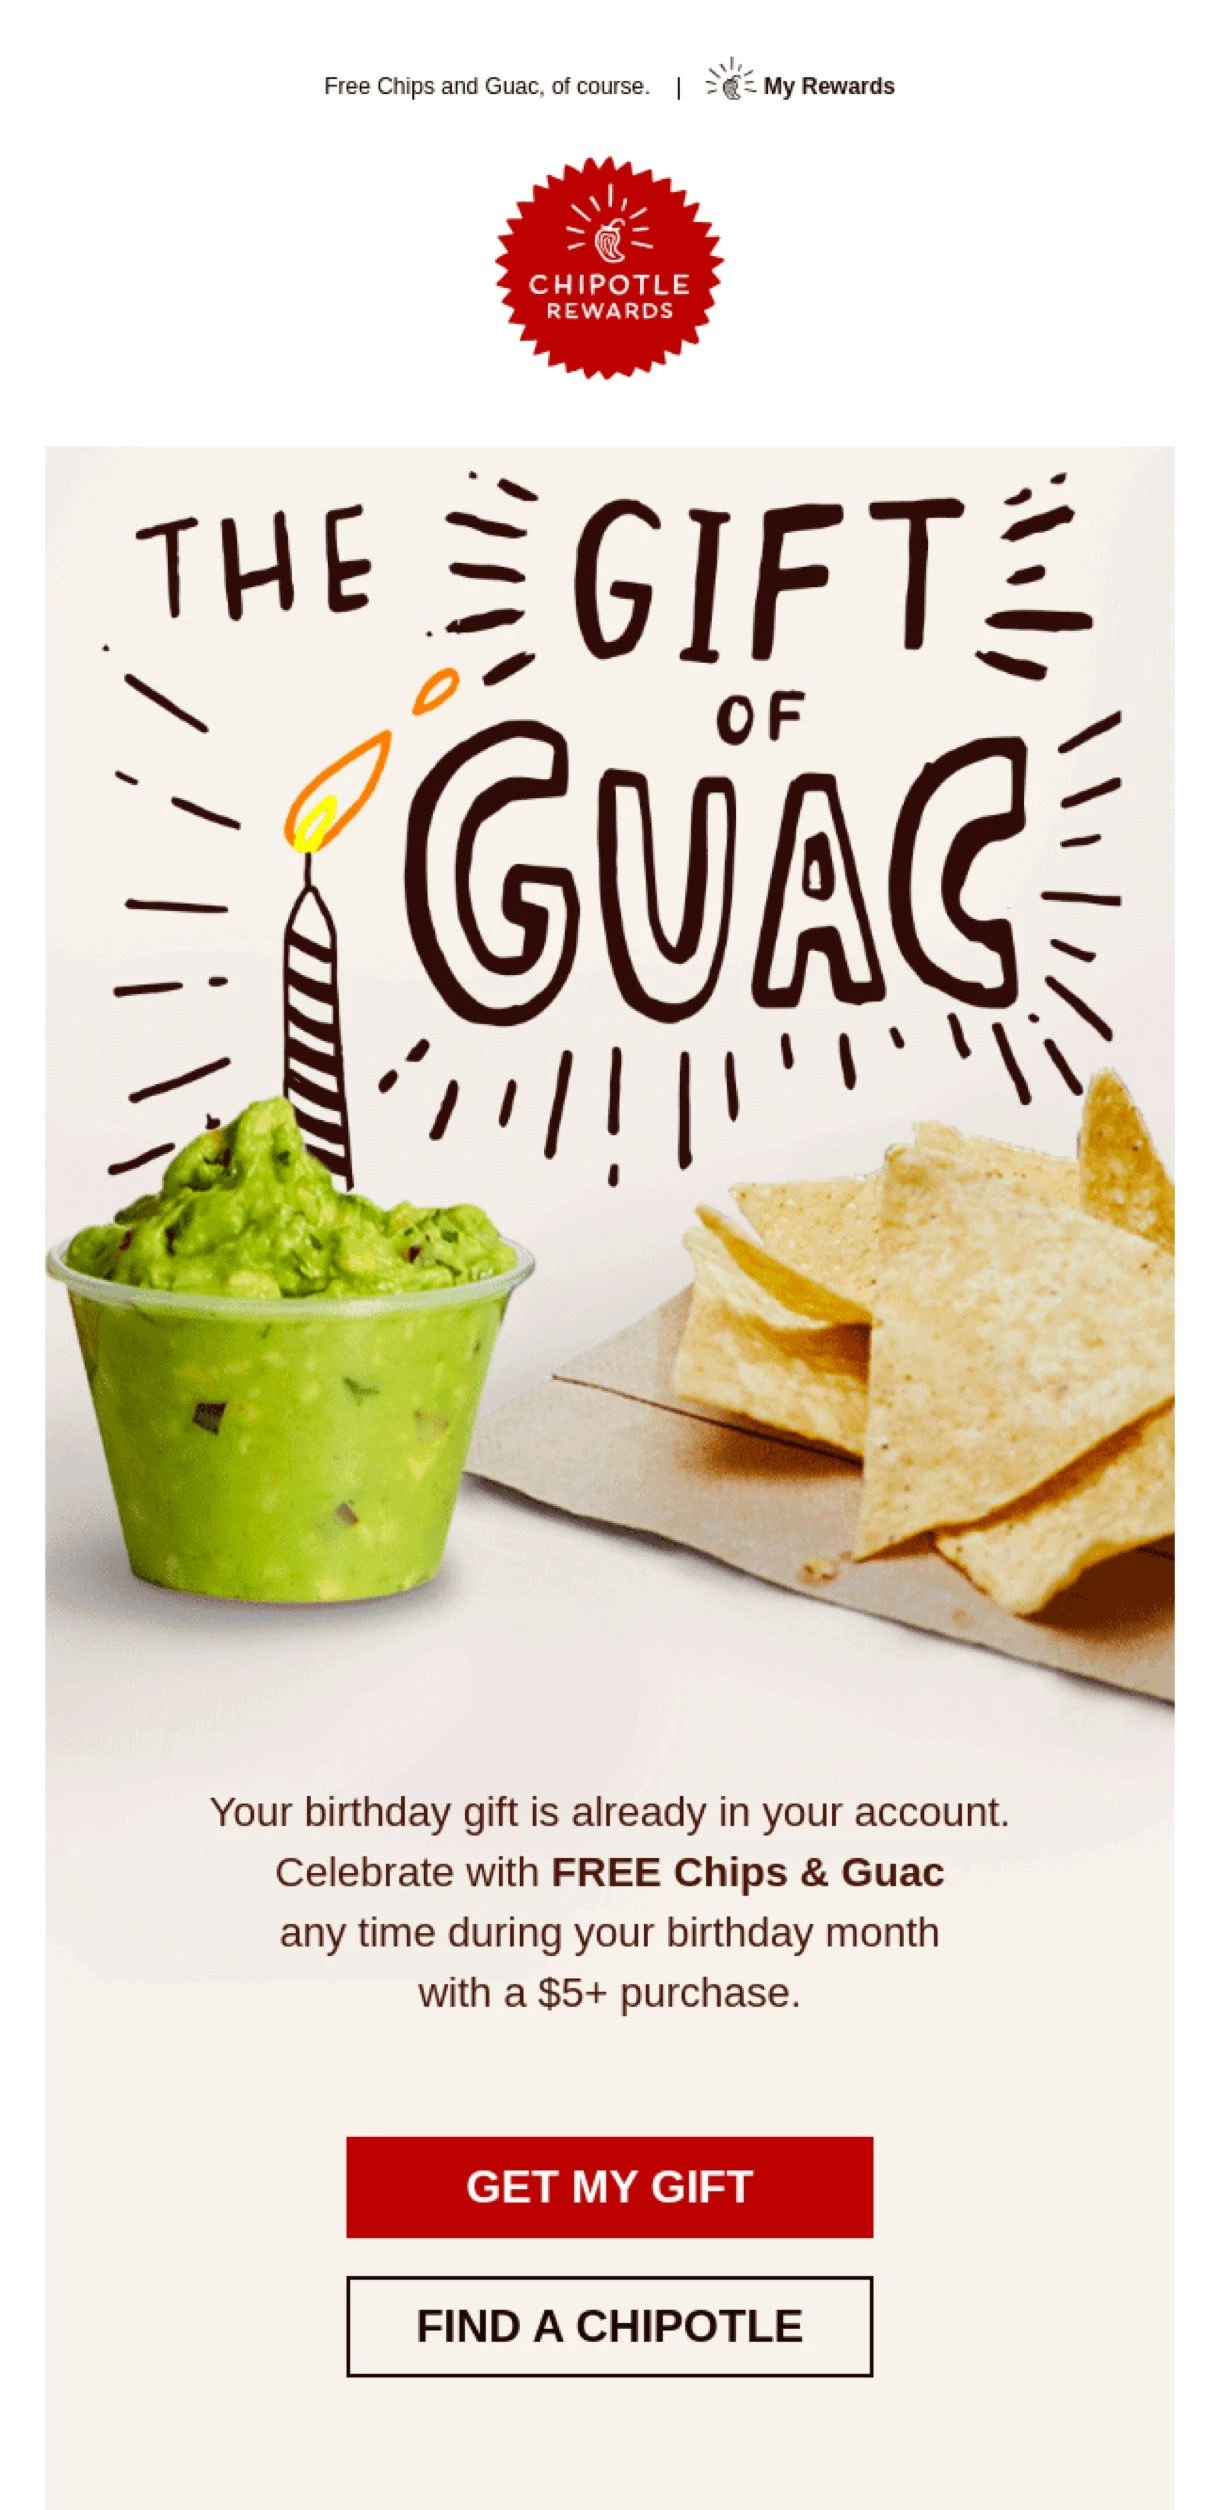 Chipotle free guac birthday present email